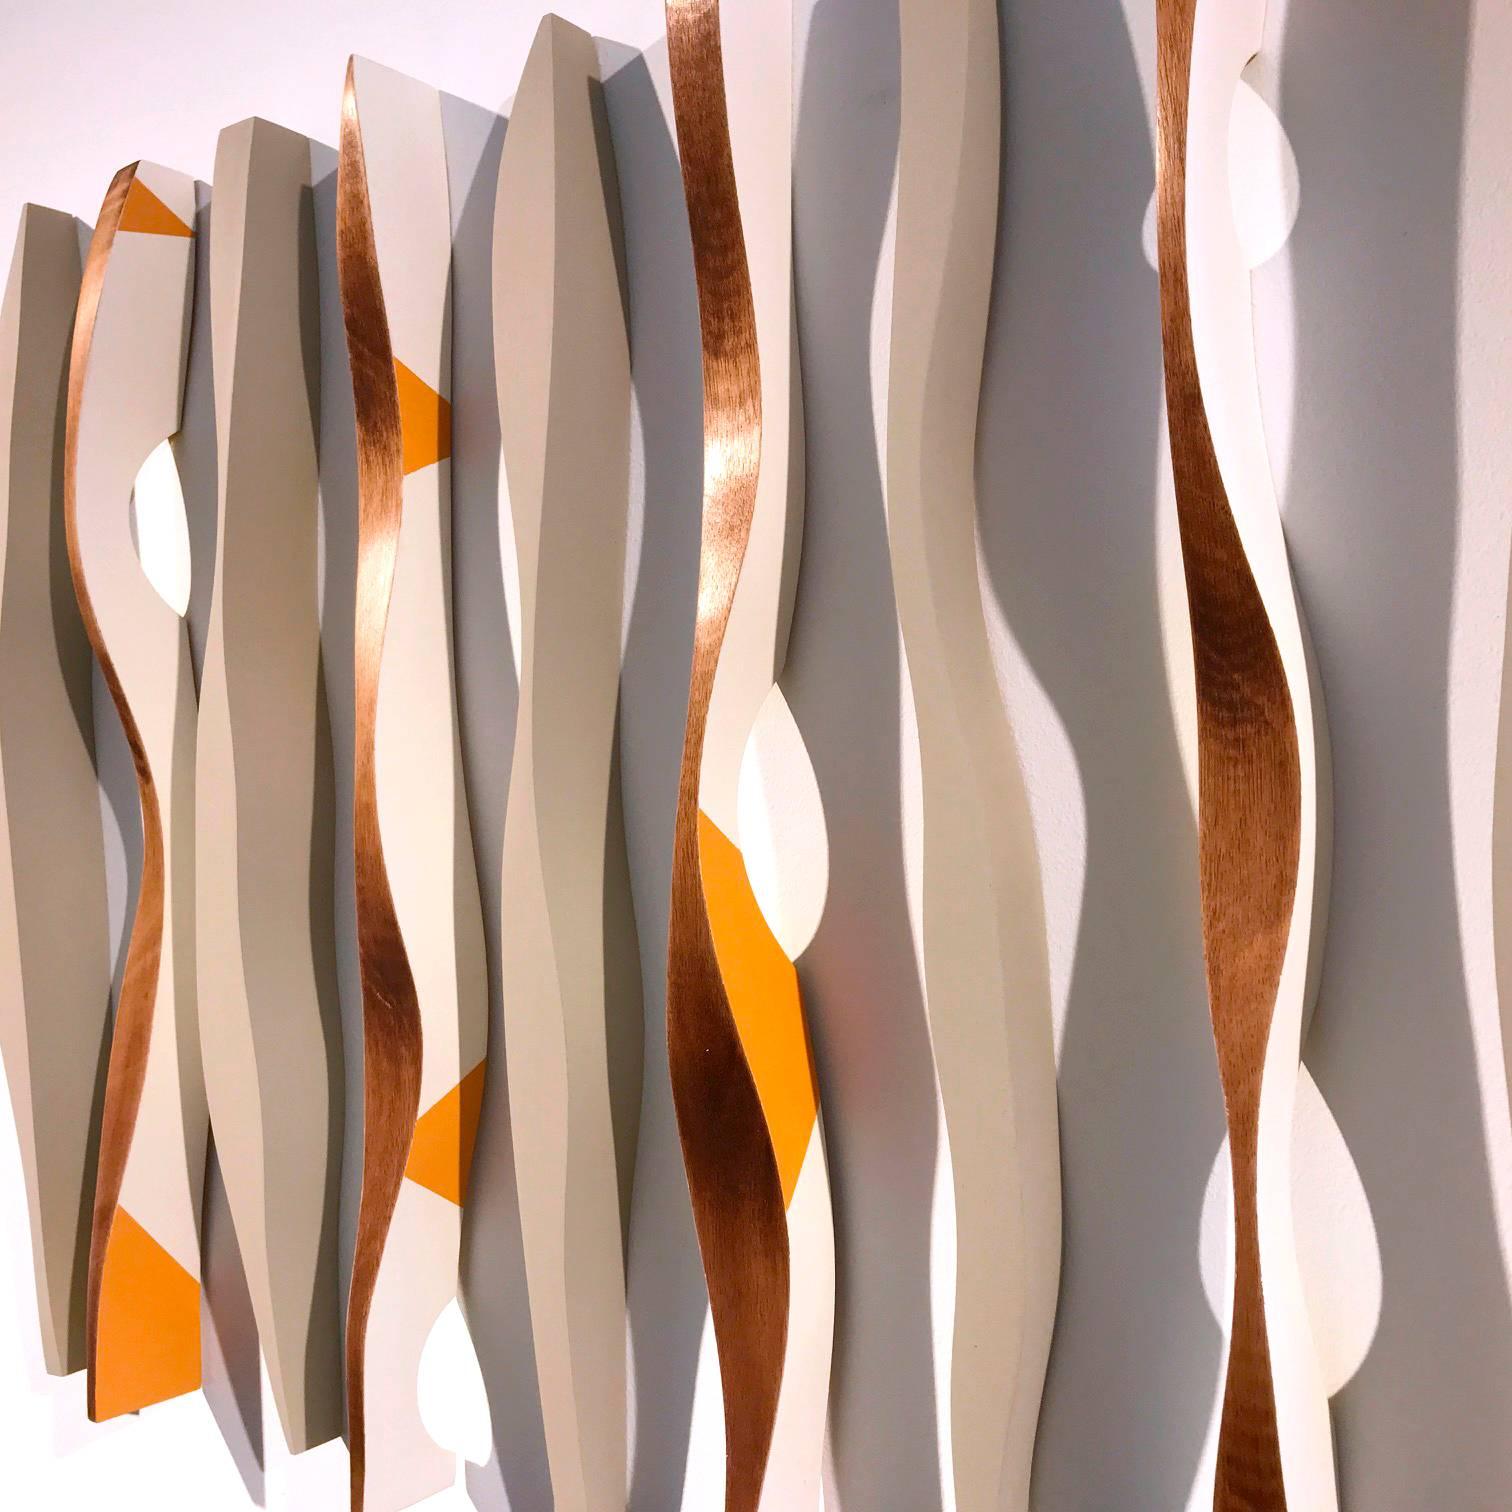 Wood sculpture, Mural Installation, Mid Century style  - Sculpture by Pascal Pierme